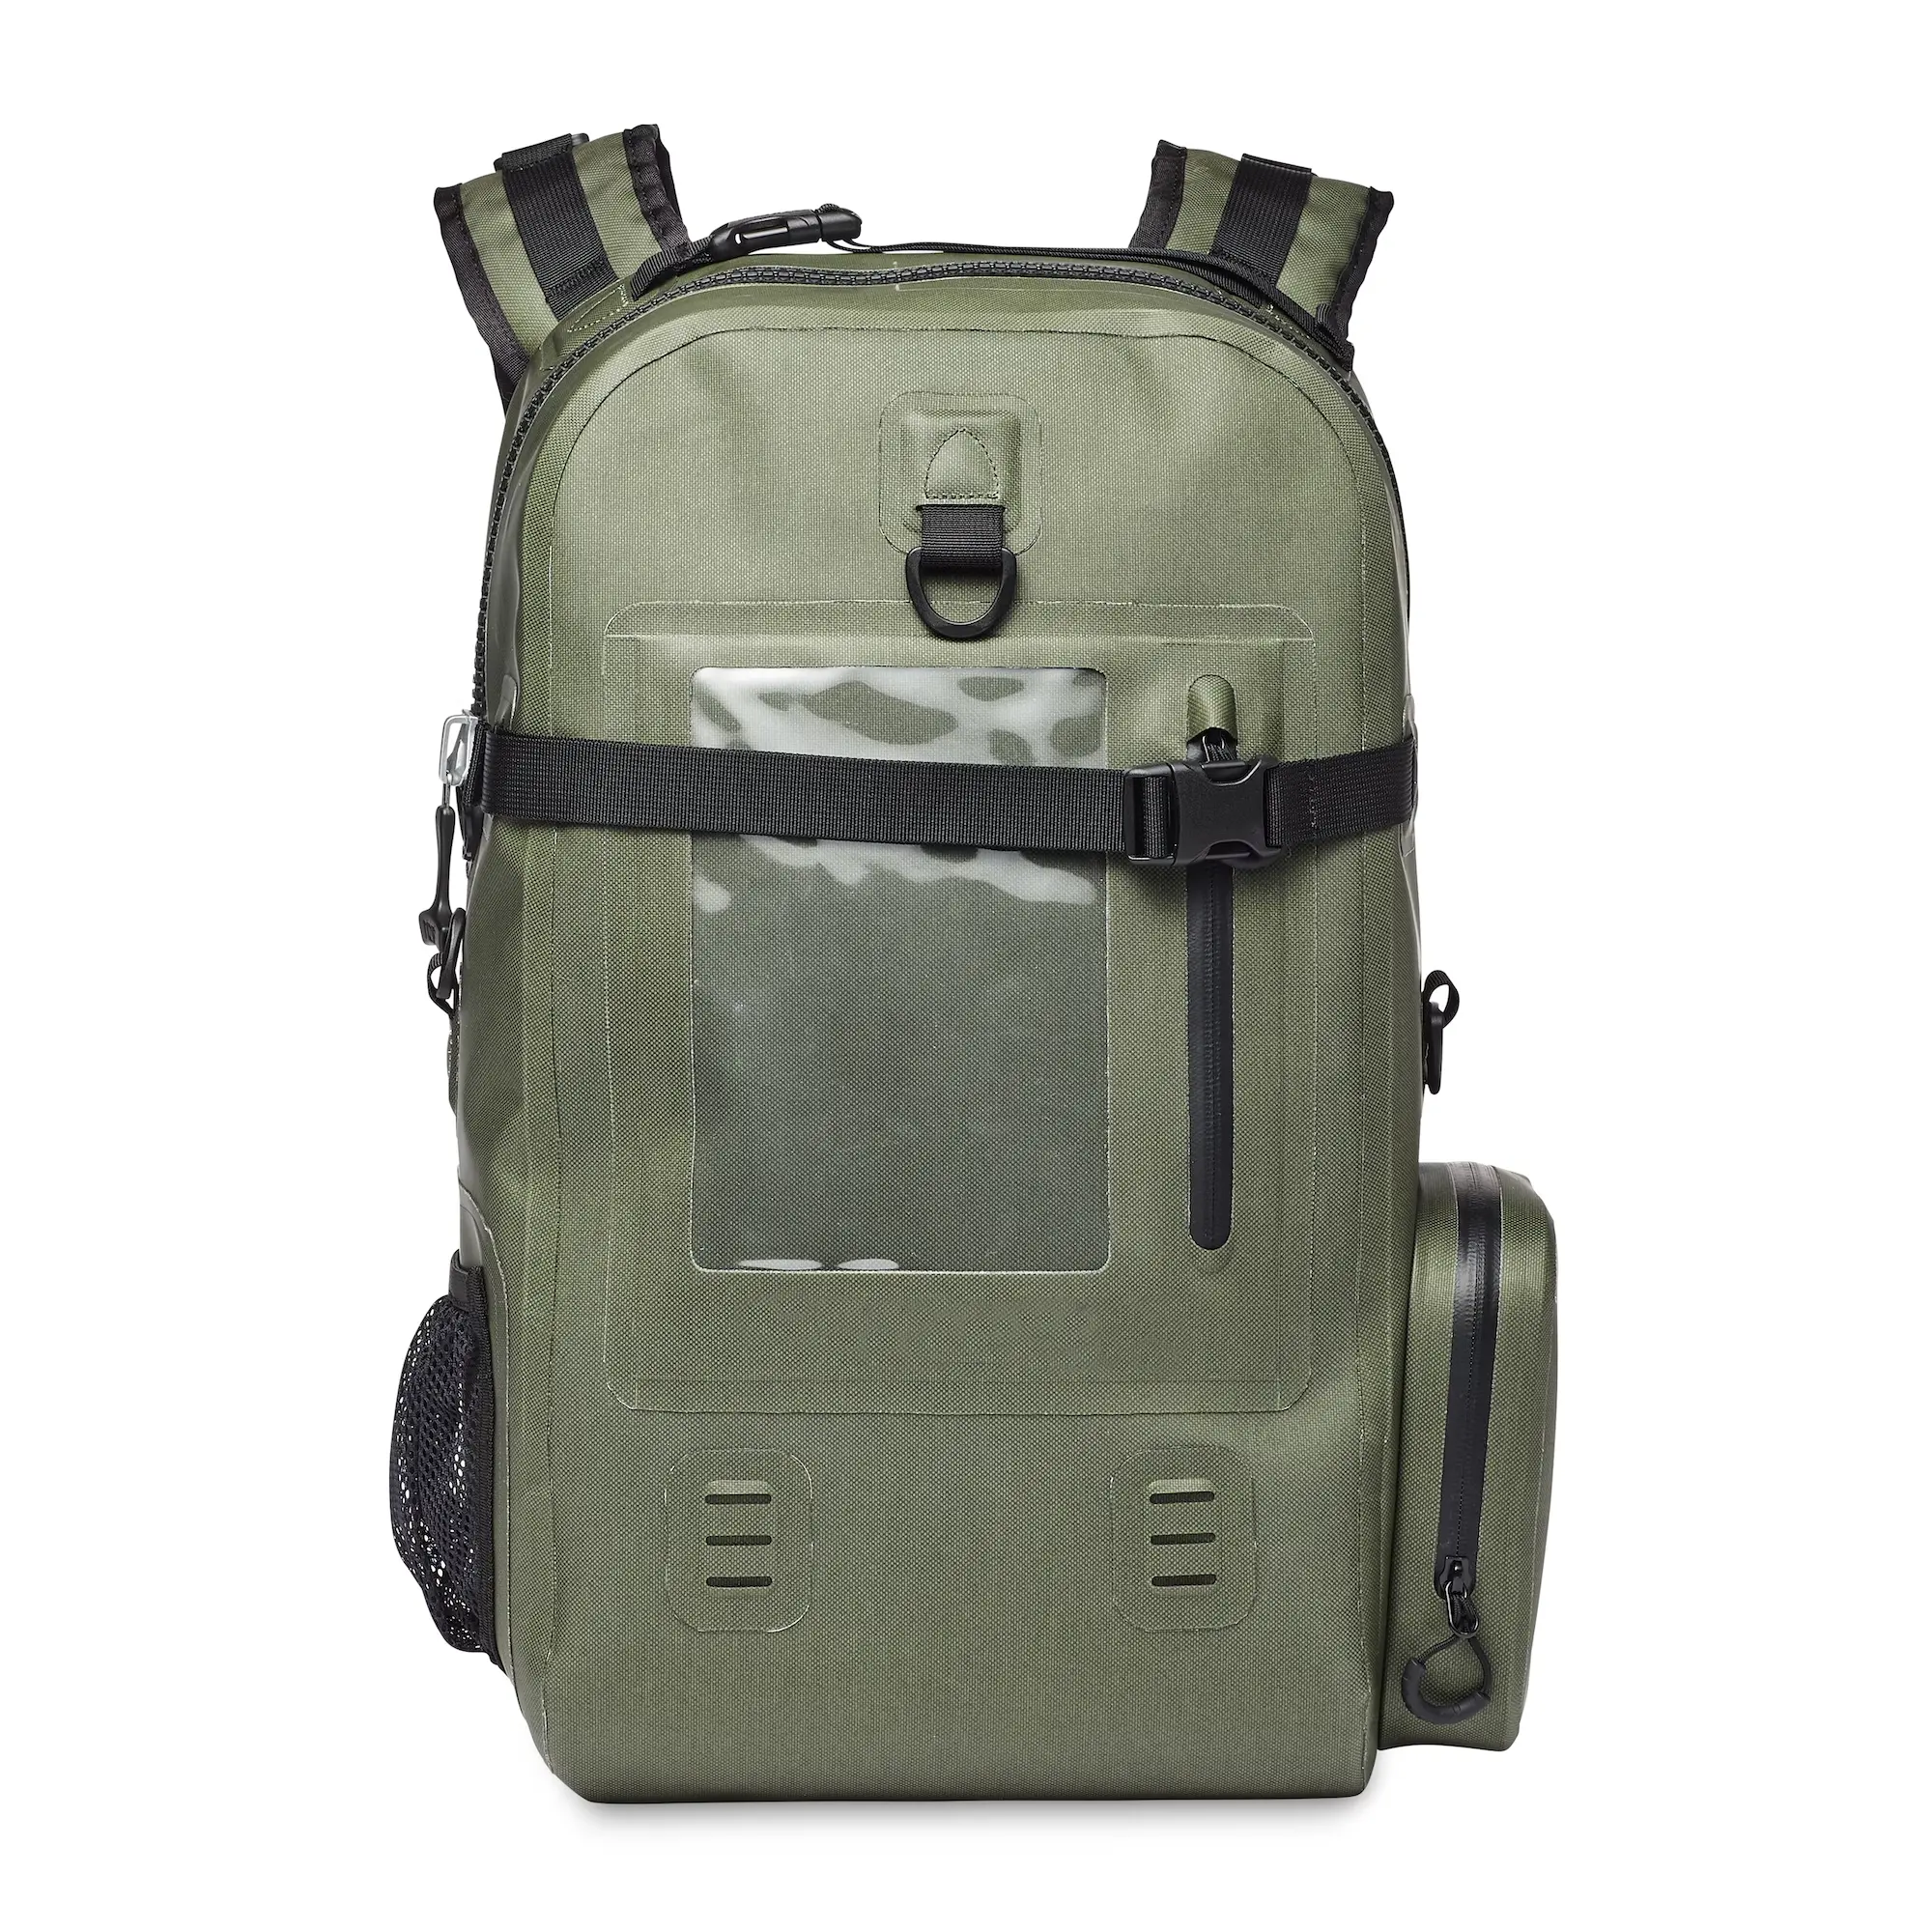 Outdoor Backpack Dry Bag Fully Submersible and Equipped with Comfortable Backpack Straps For Camping Hiking Hunting